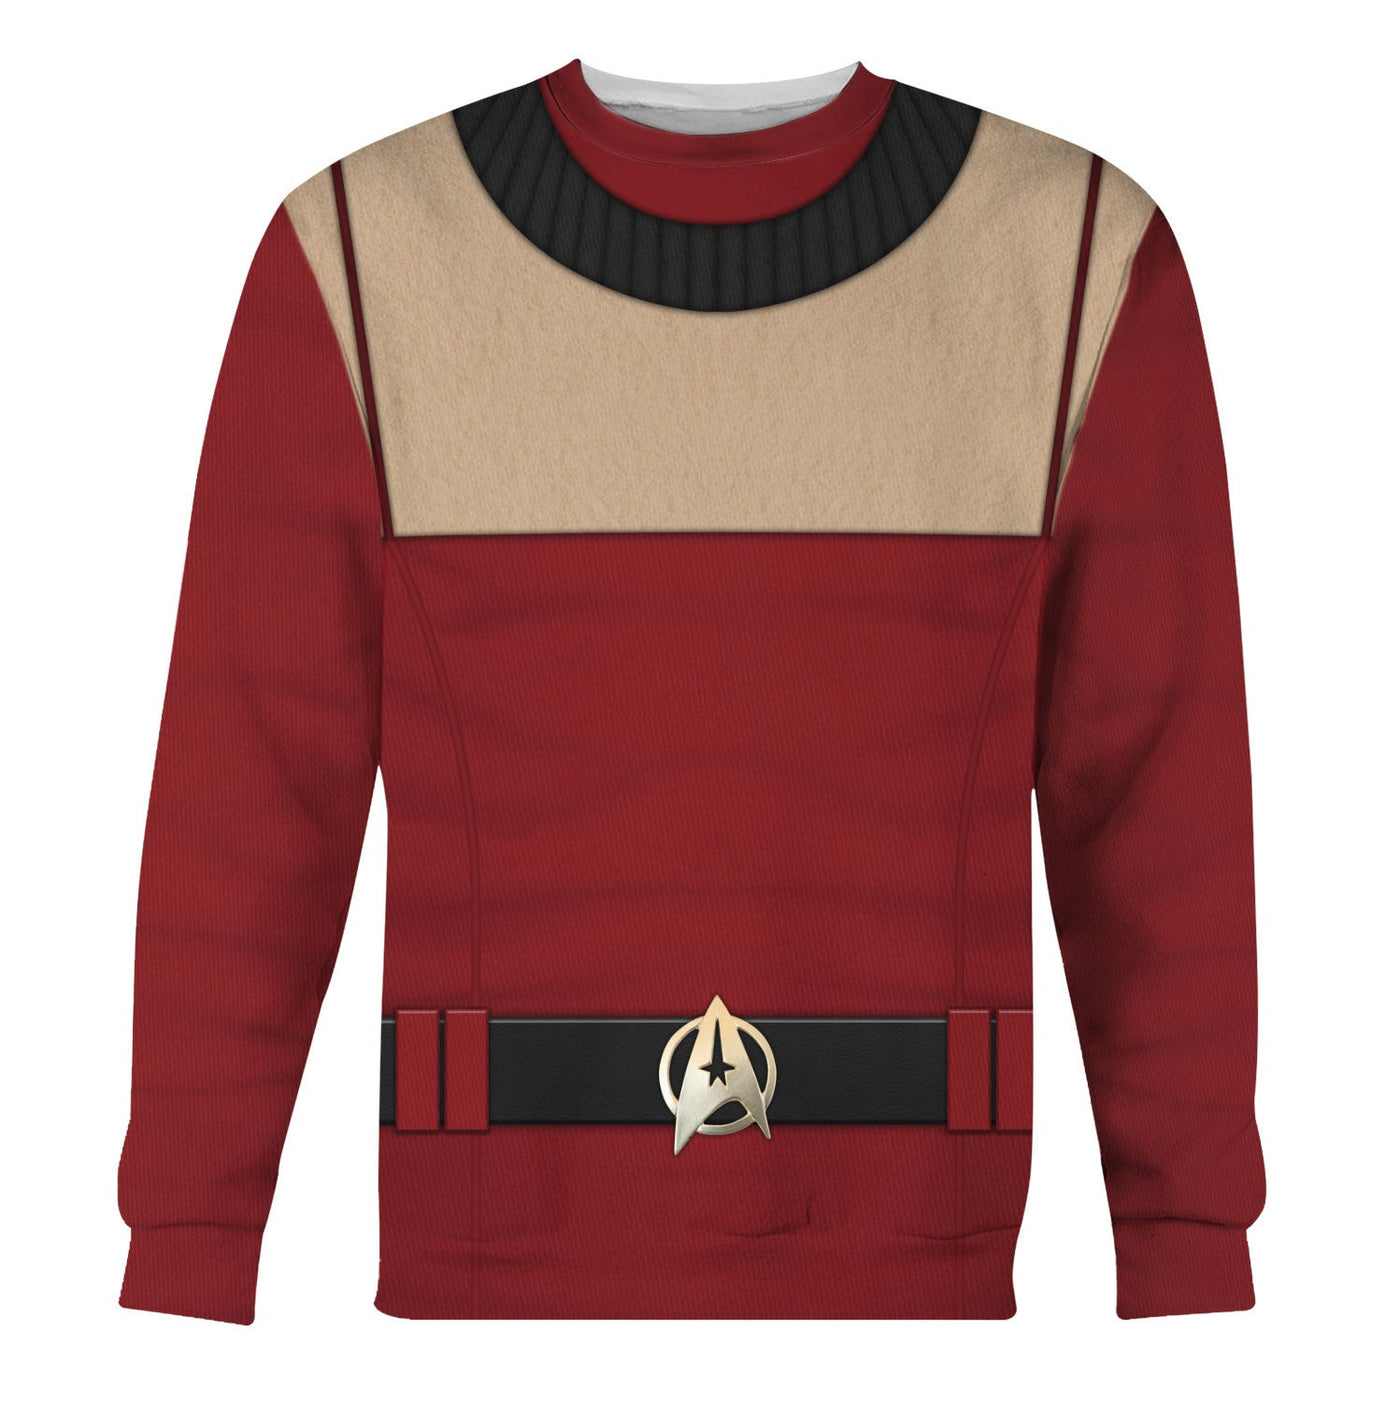 Star Trek Young Picard Cool - Sweater - Ugly Christmas Sweater